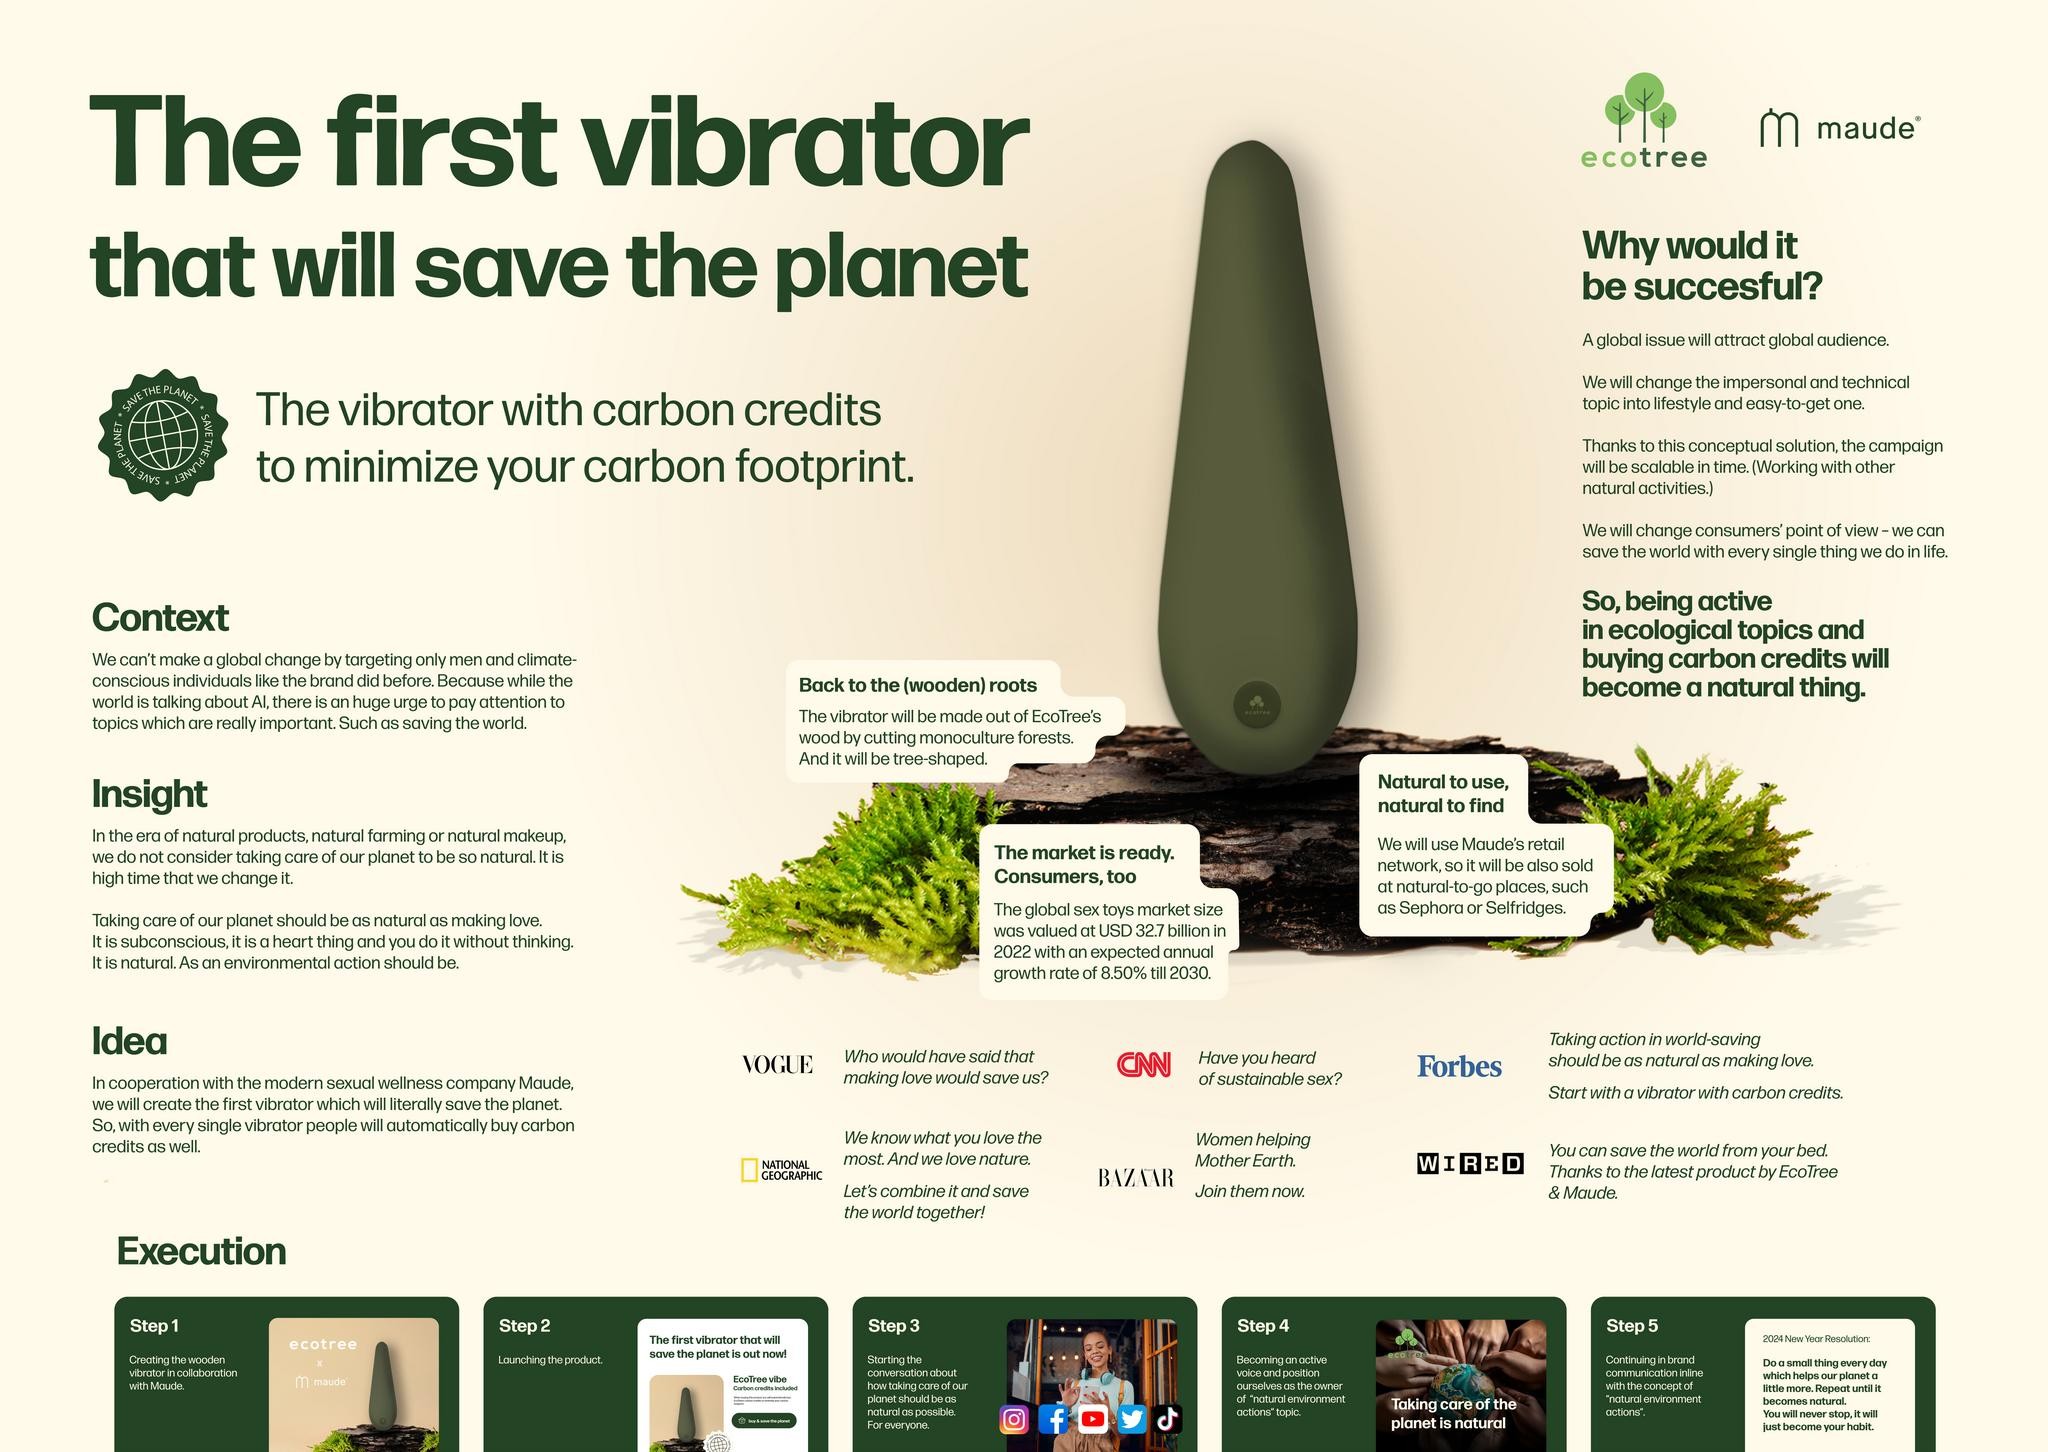 The first vibrator that will save the planet